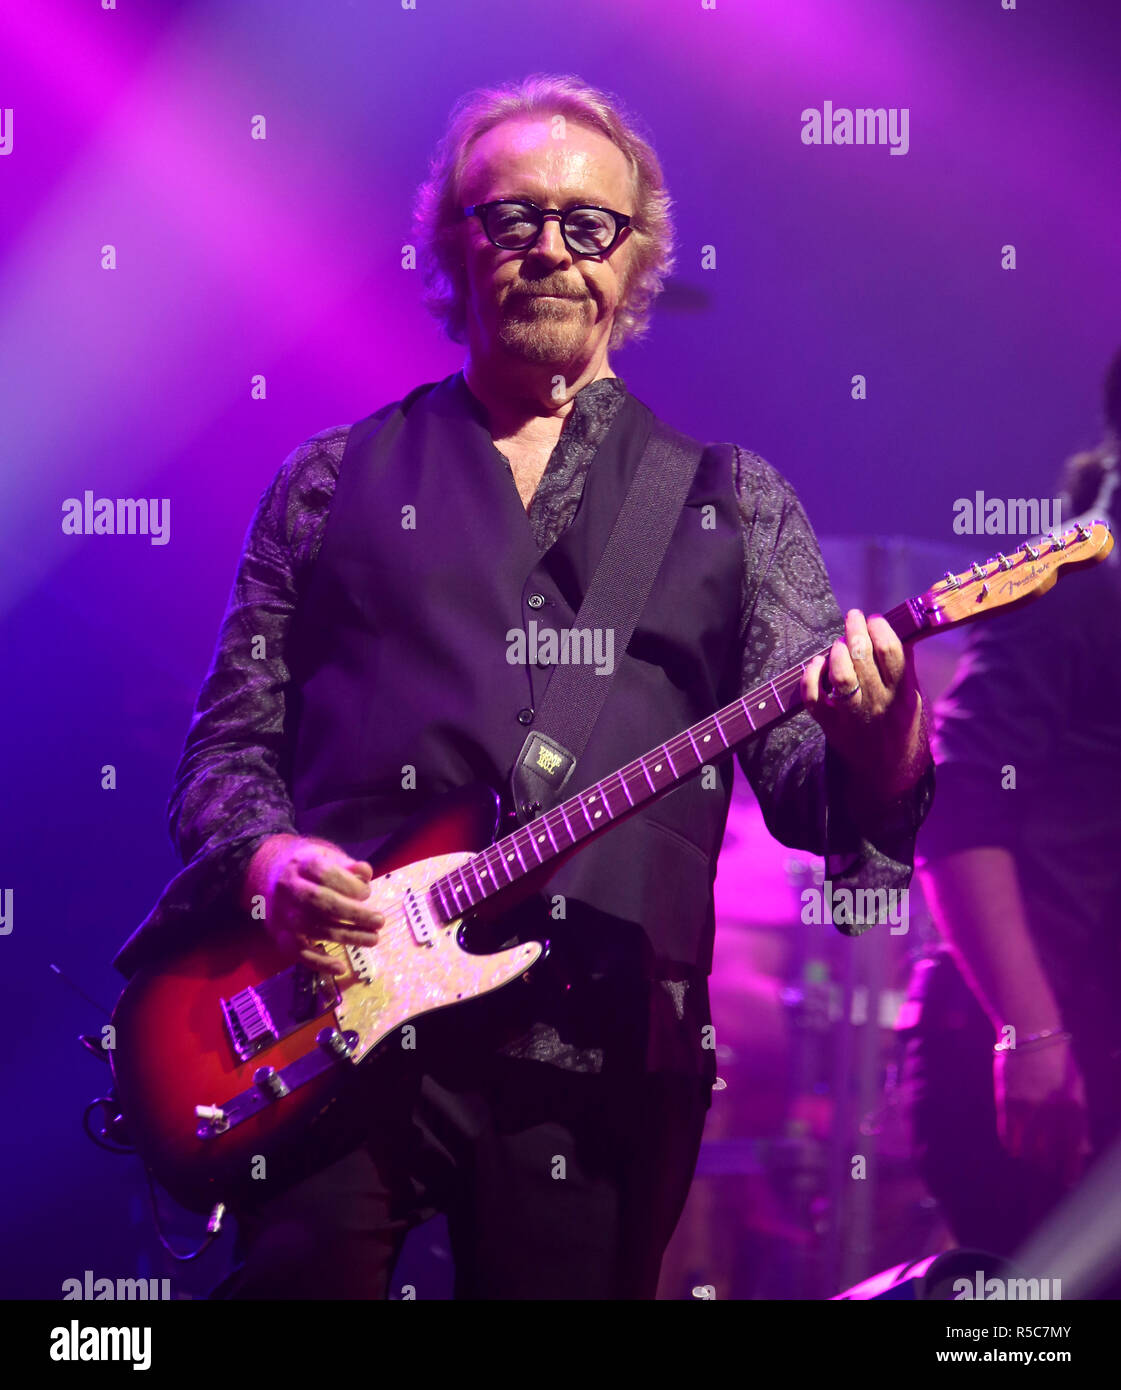 Padua, PD, Italy - May 19, 2017: Live Concert indoor of Umberto Tozzi an  Italian pop and rock singer and composer Stock Photo - Alamy